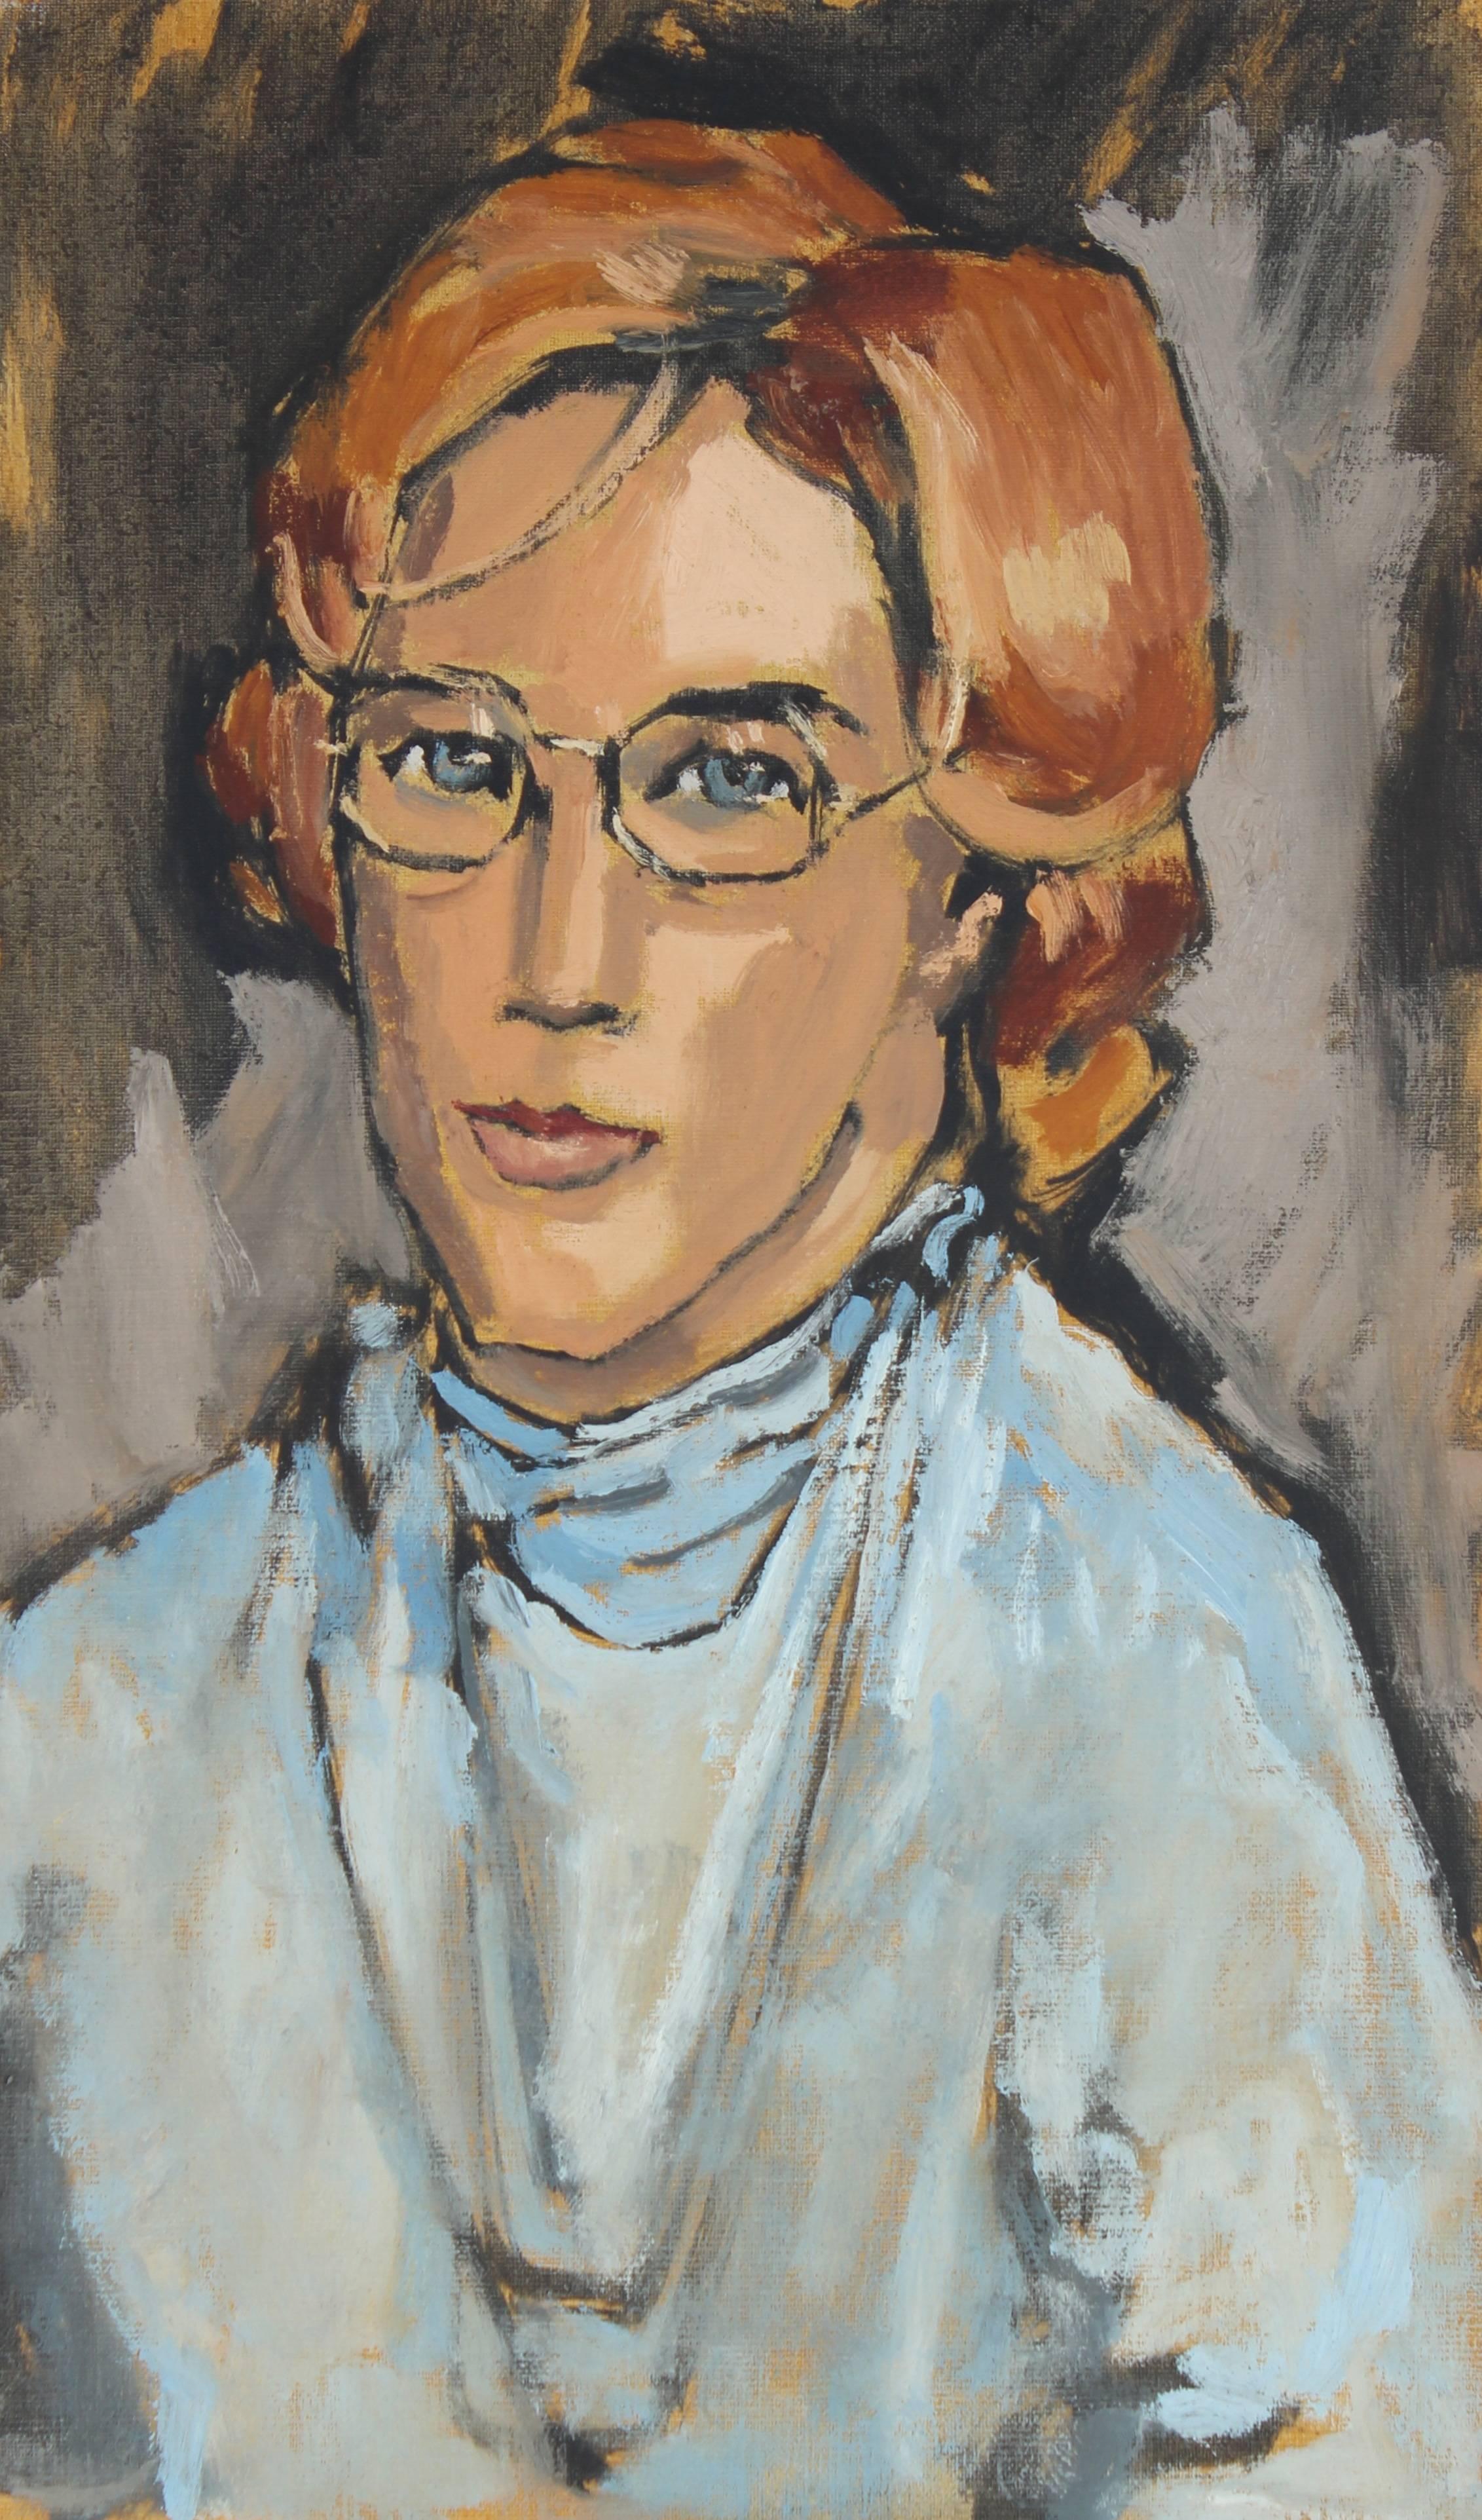 Woman with Glasses, Modernist Portrait in Oil, 1969